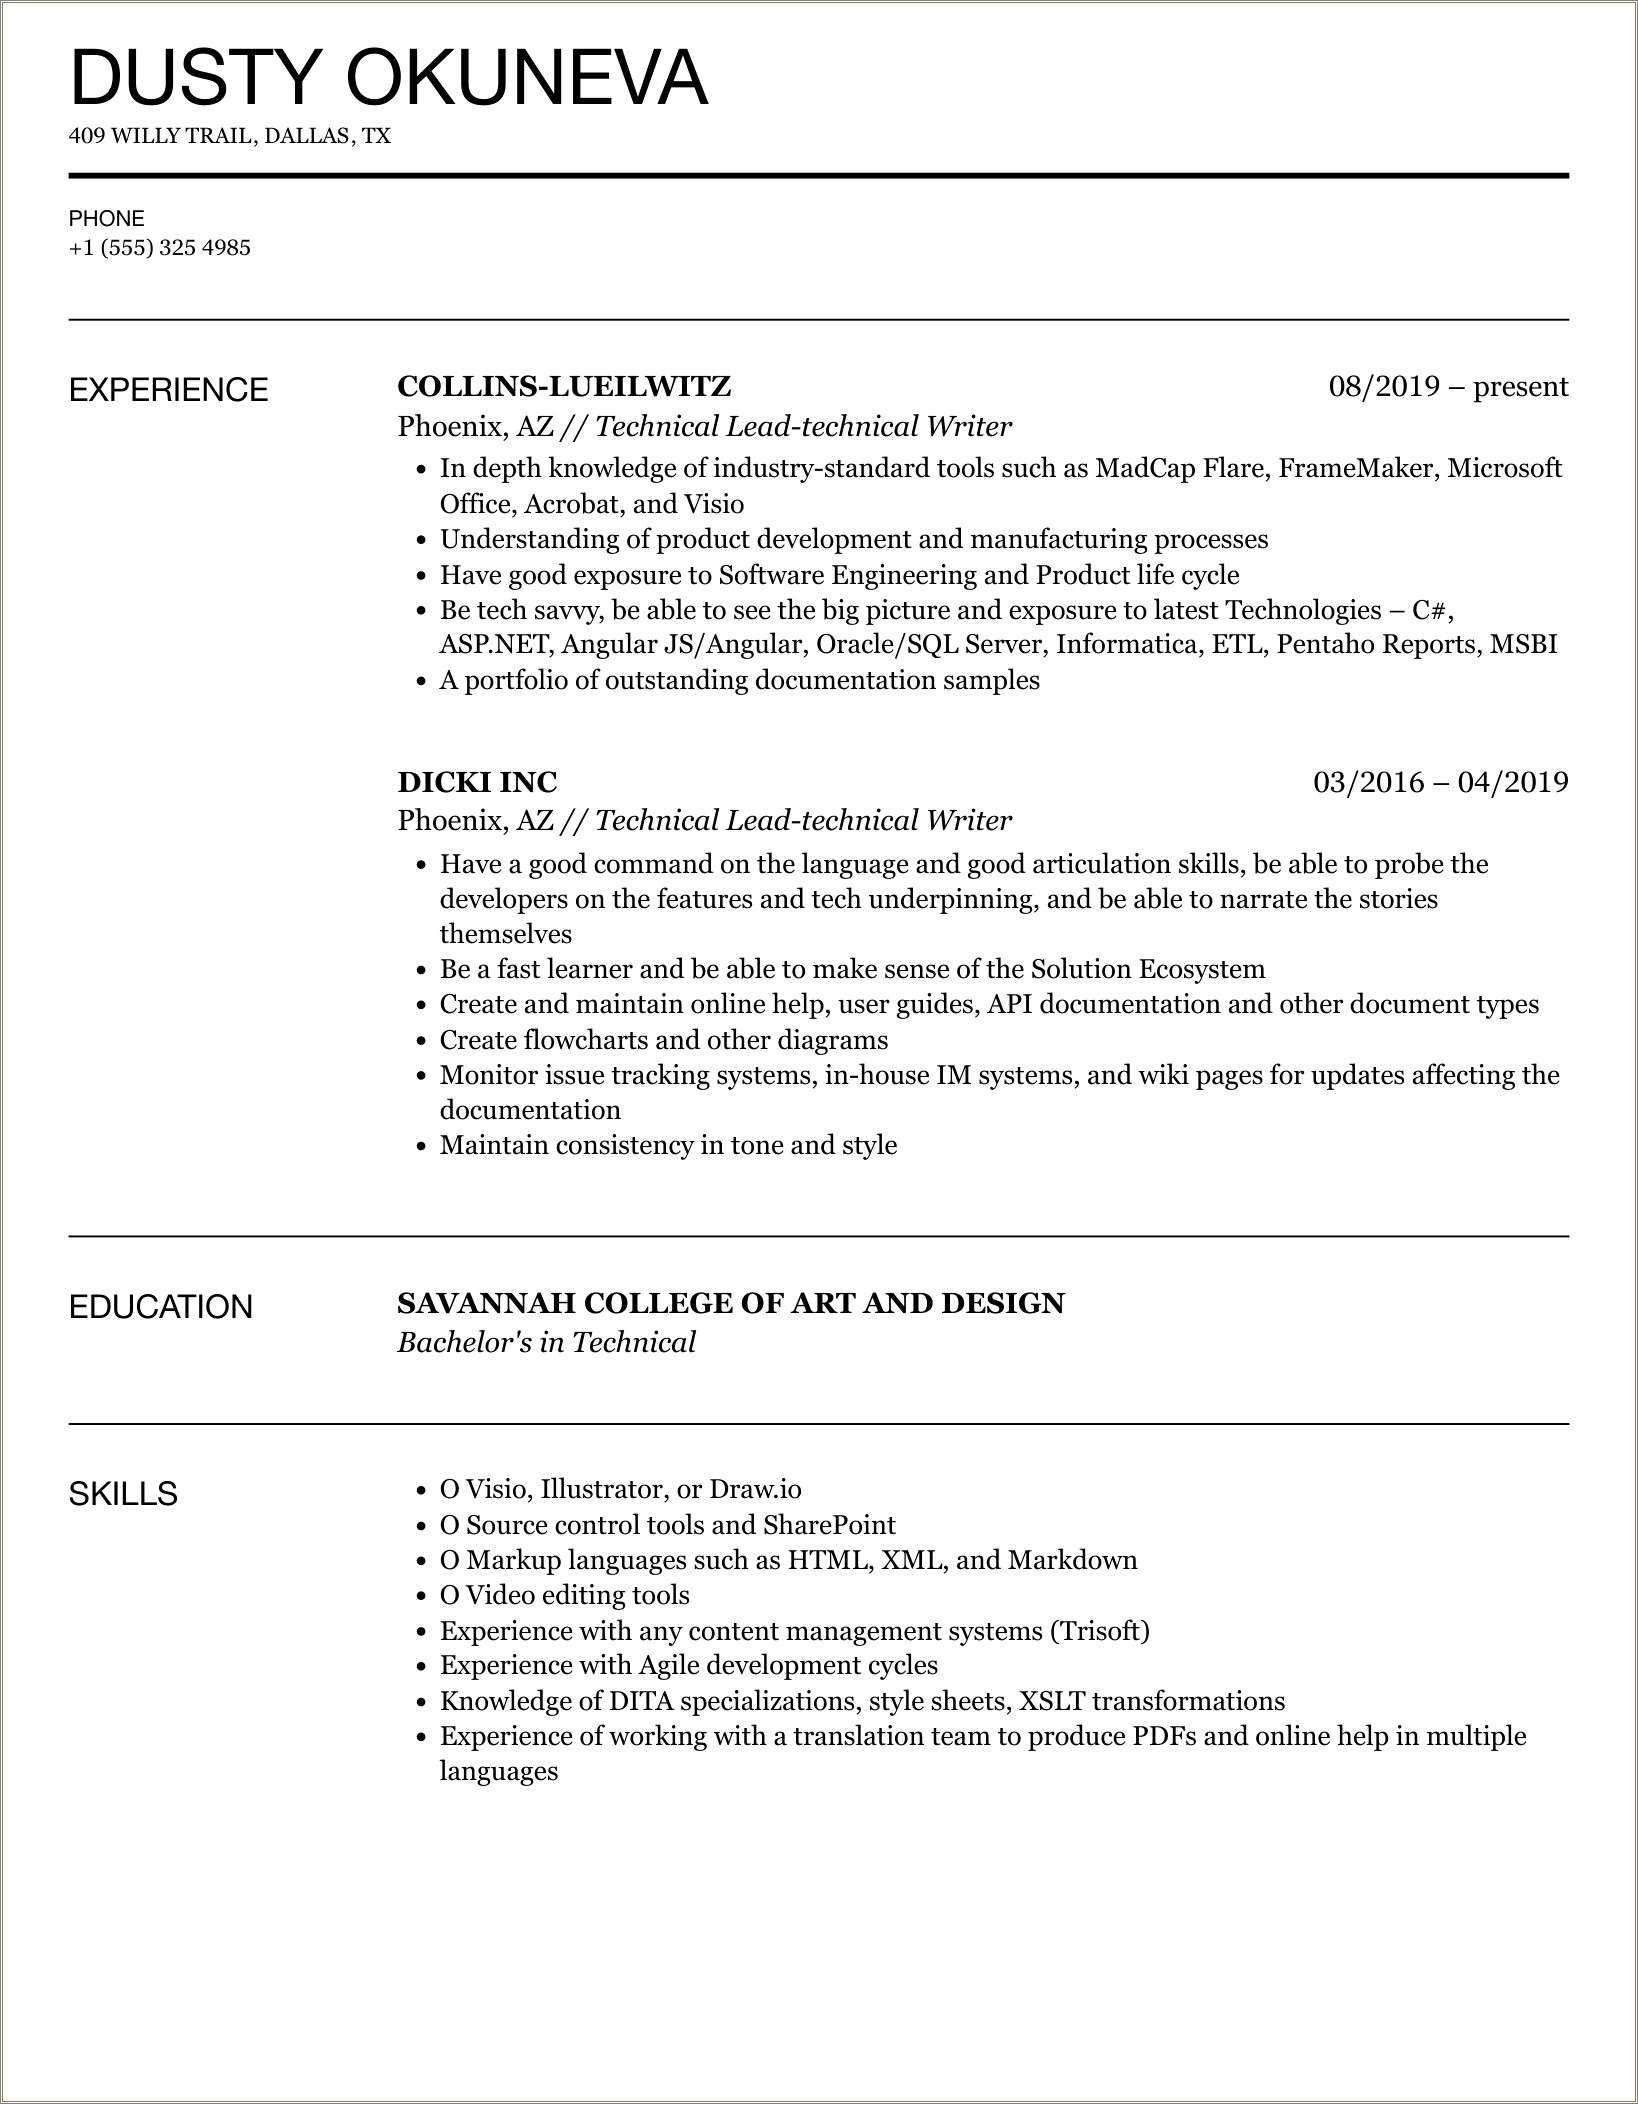 Sample Resume Of A Technical Writer